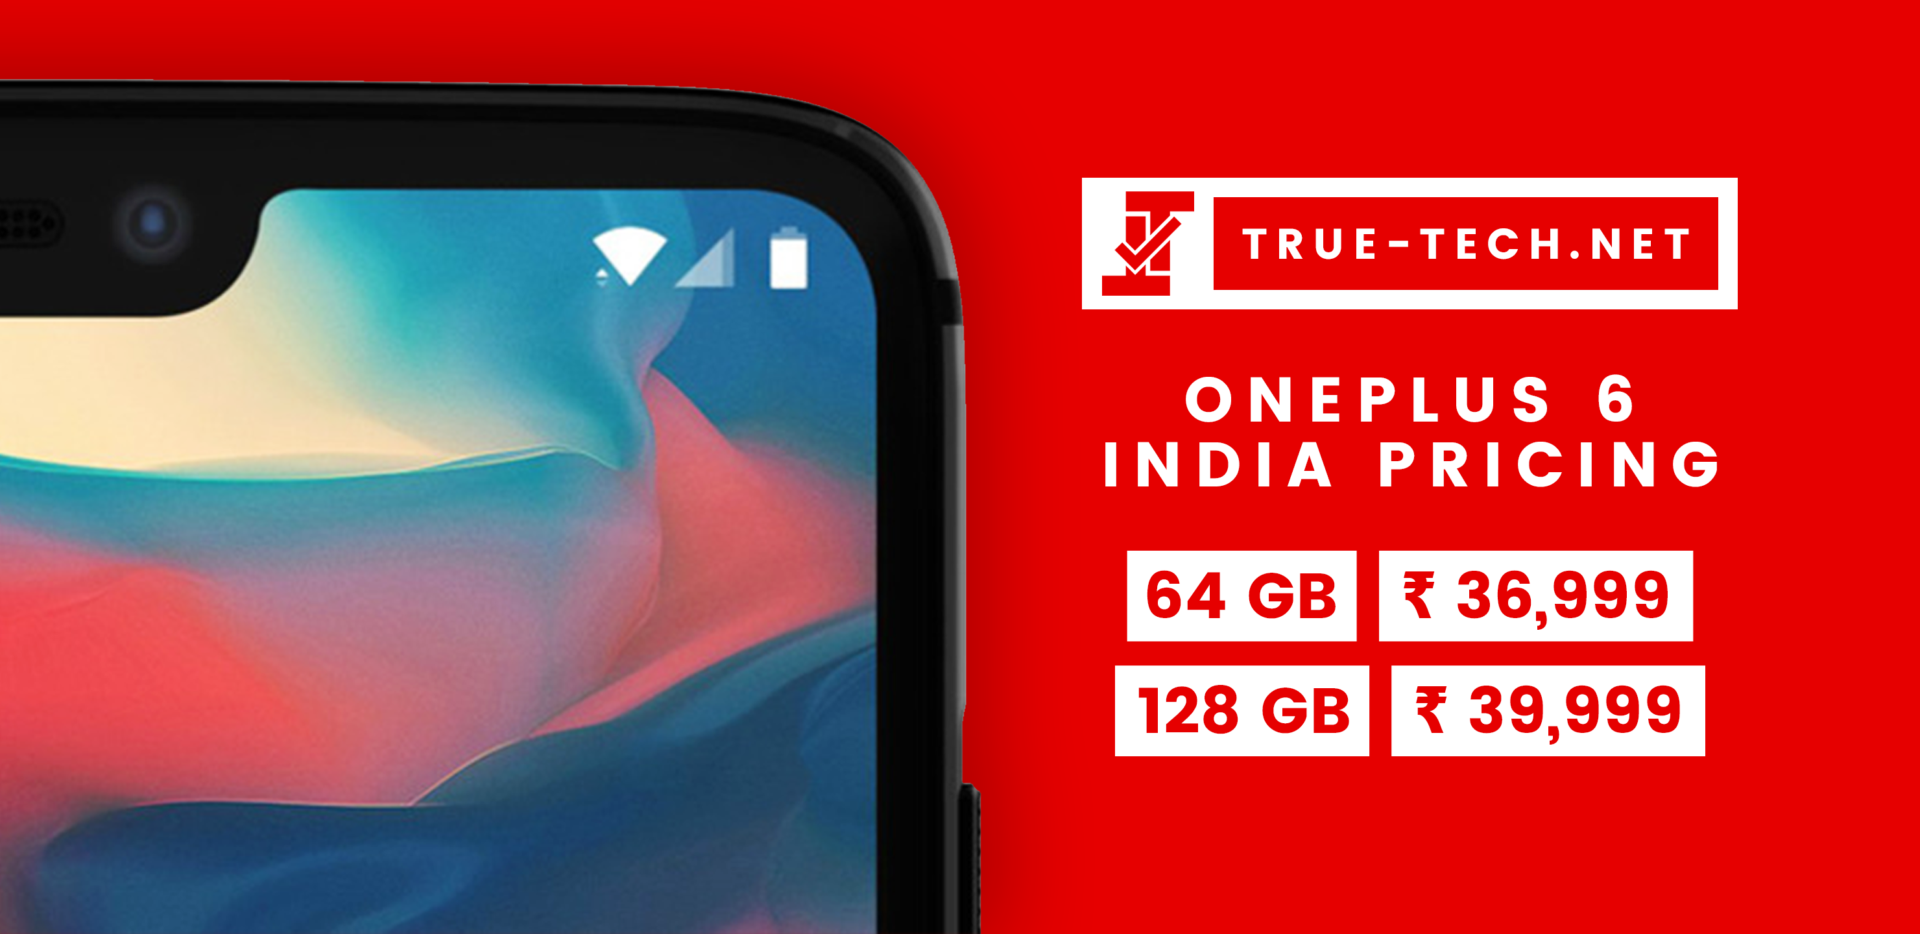 True Tech Oneplus 6 India Pricing Official – Exclusive: Oneplus 6 India Pricing To Start At Rs. 36,999, Reliable Source Confirms | Truetech